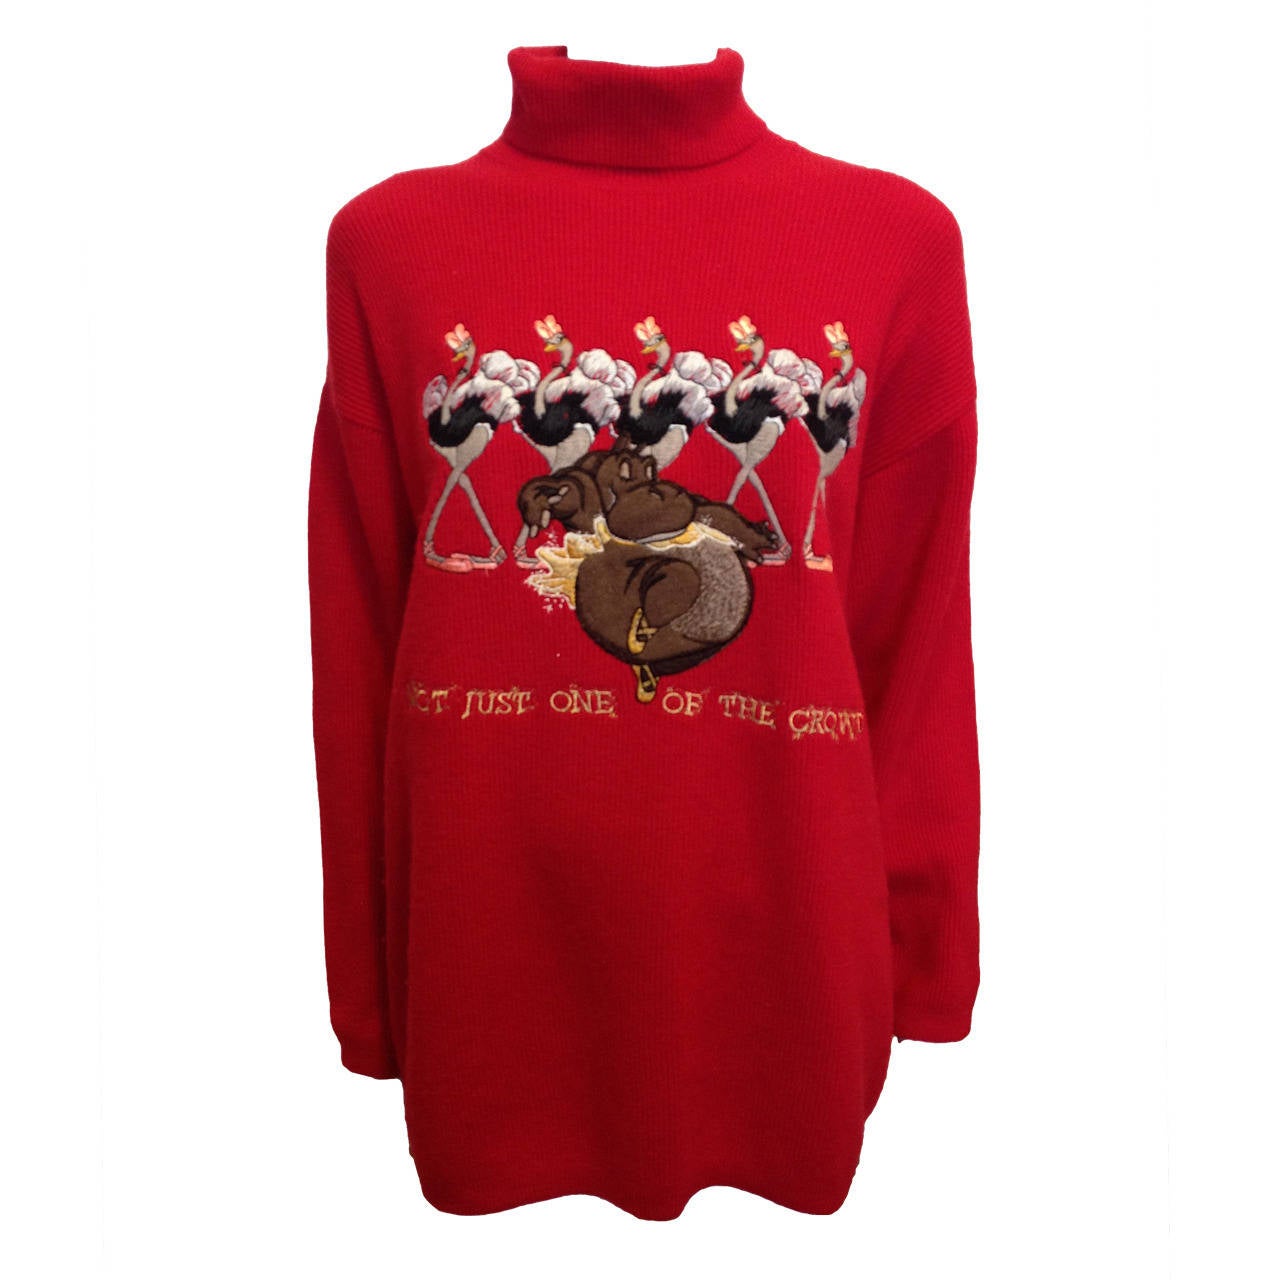 Iceberg Vintage Red Sweater with Fantasia Applique